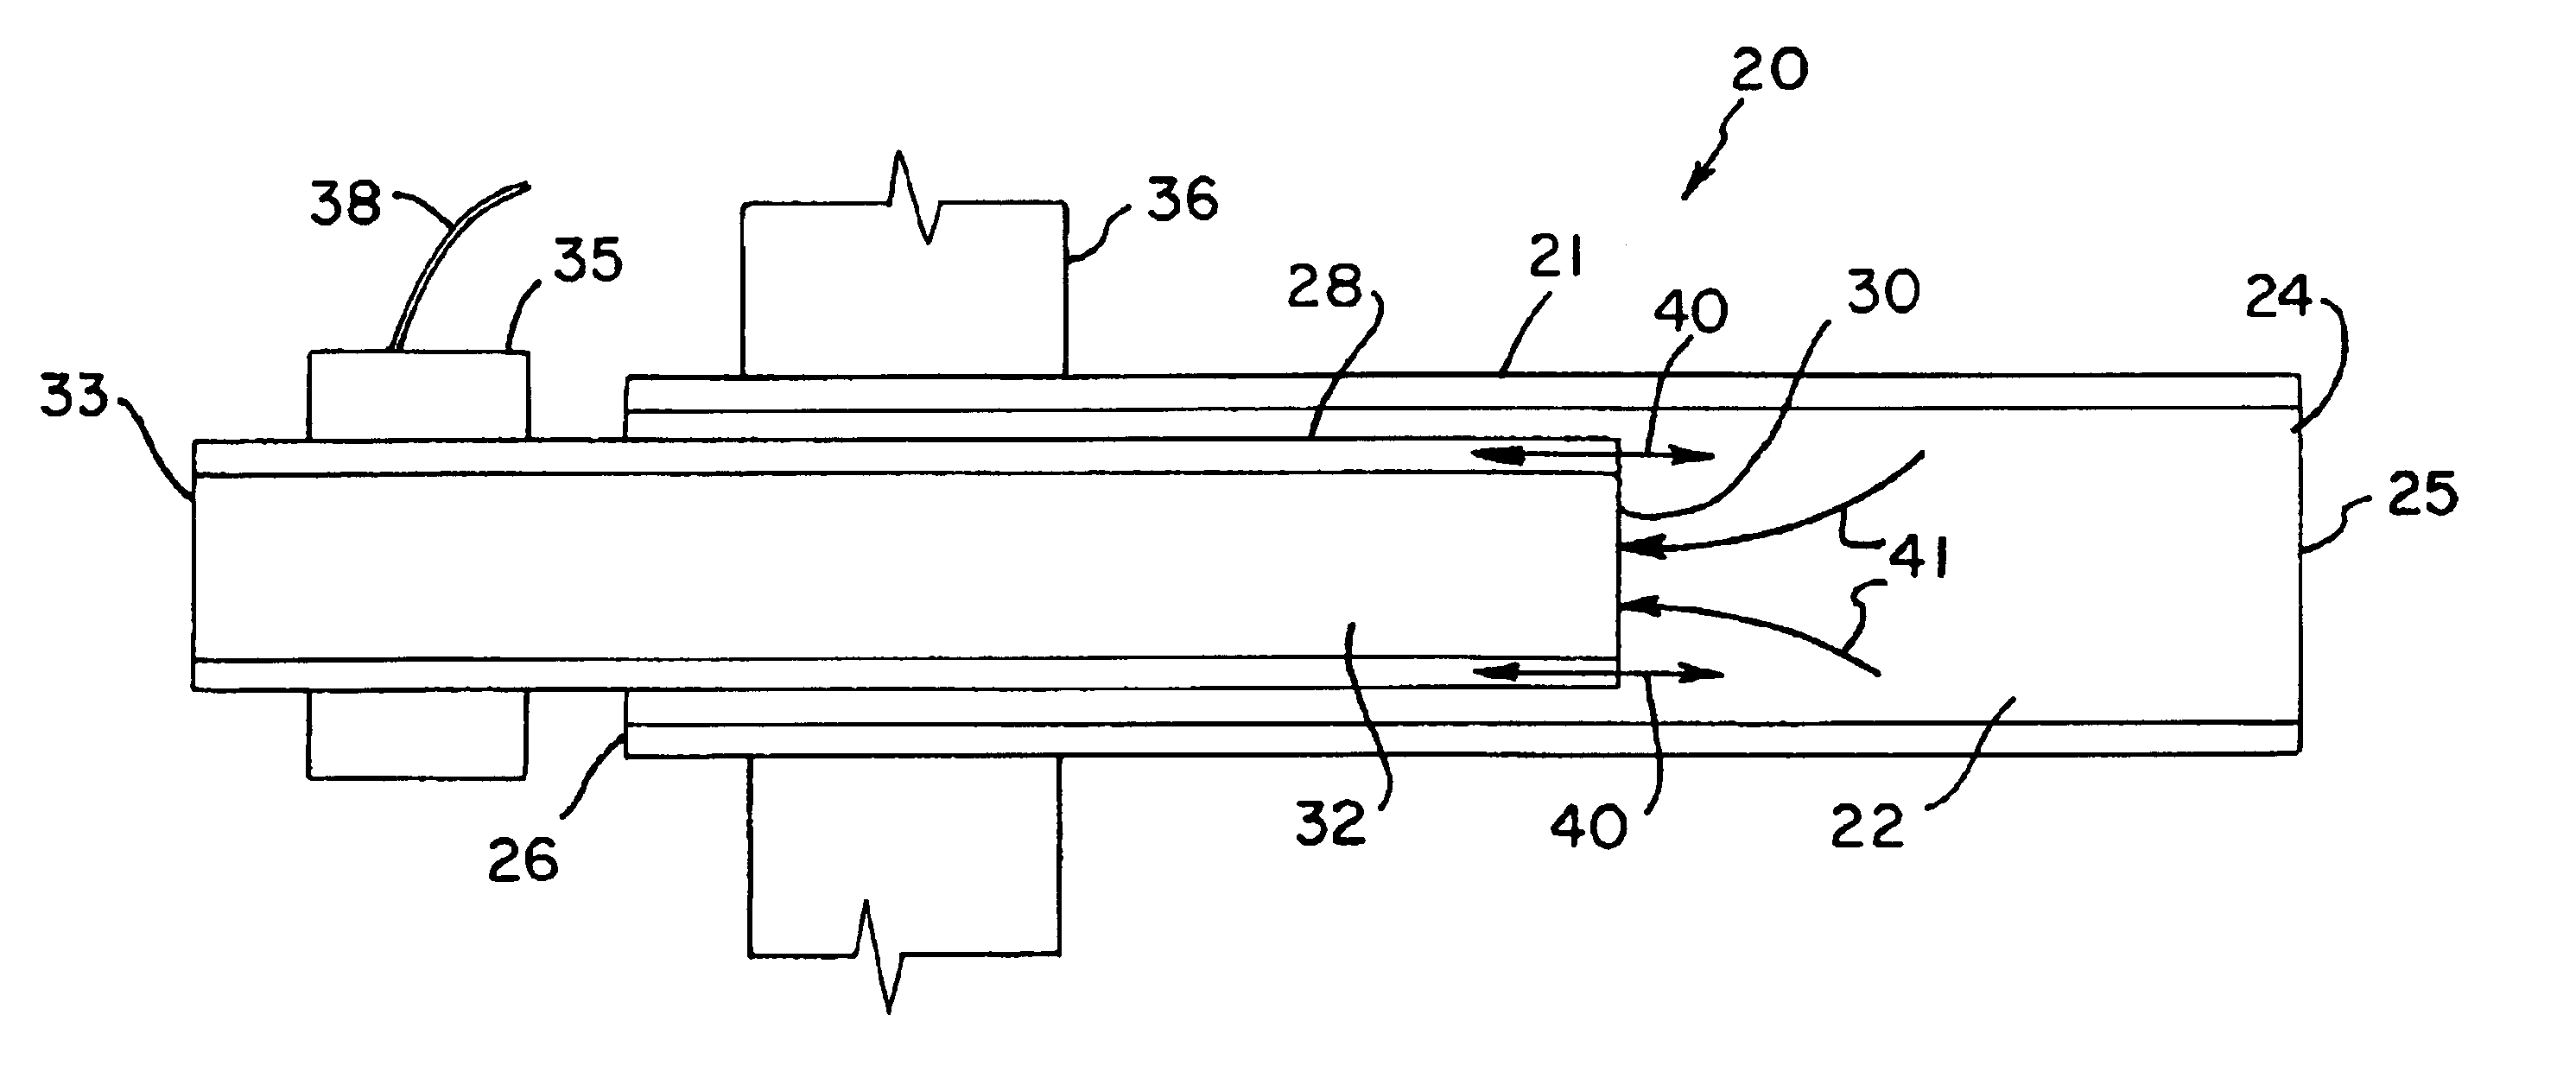 Ultrasonically actuated needle pump system